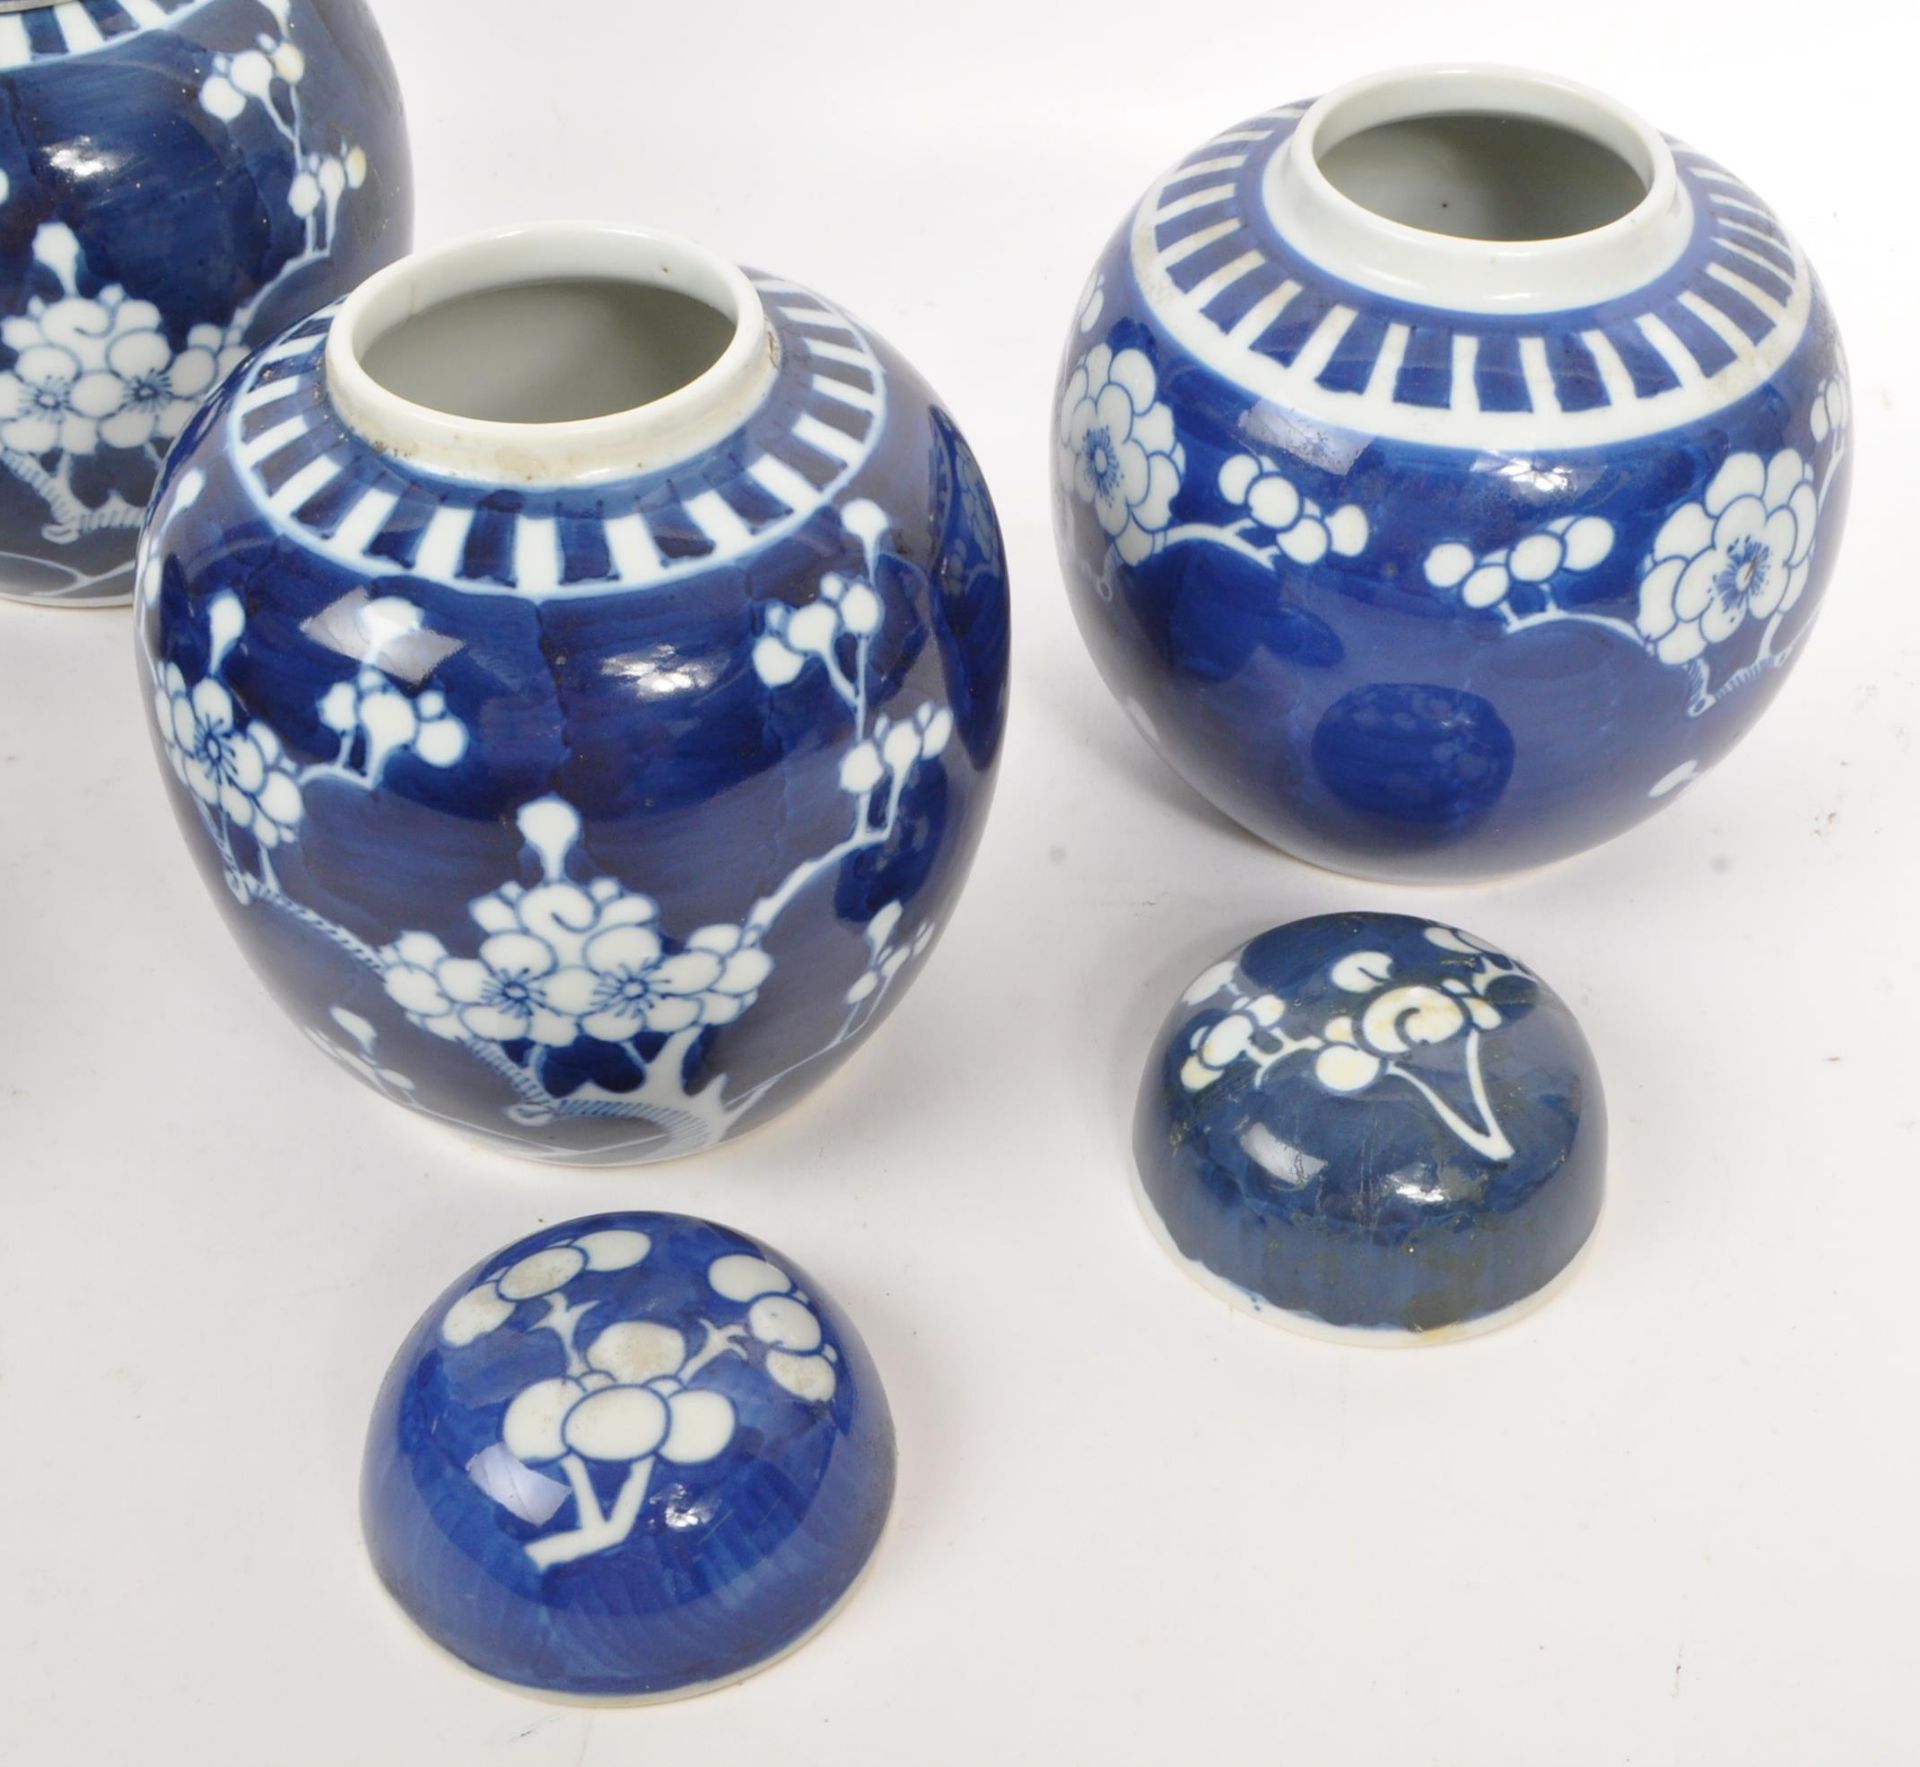 FIVE 19TH CENTURY & LATER CHINESE PORCELAIN PRUNUS GINGER JARS - Image 4 of 6